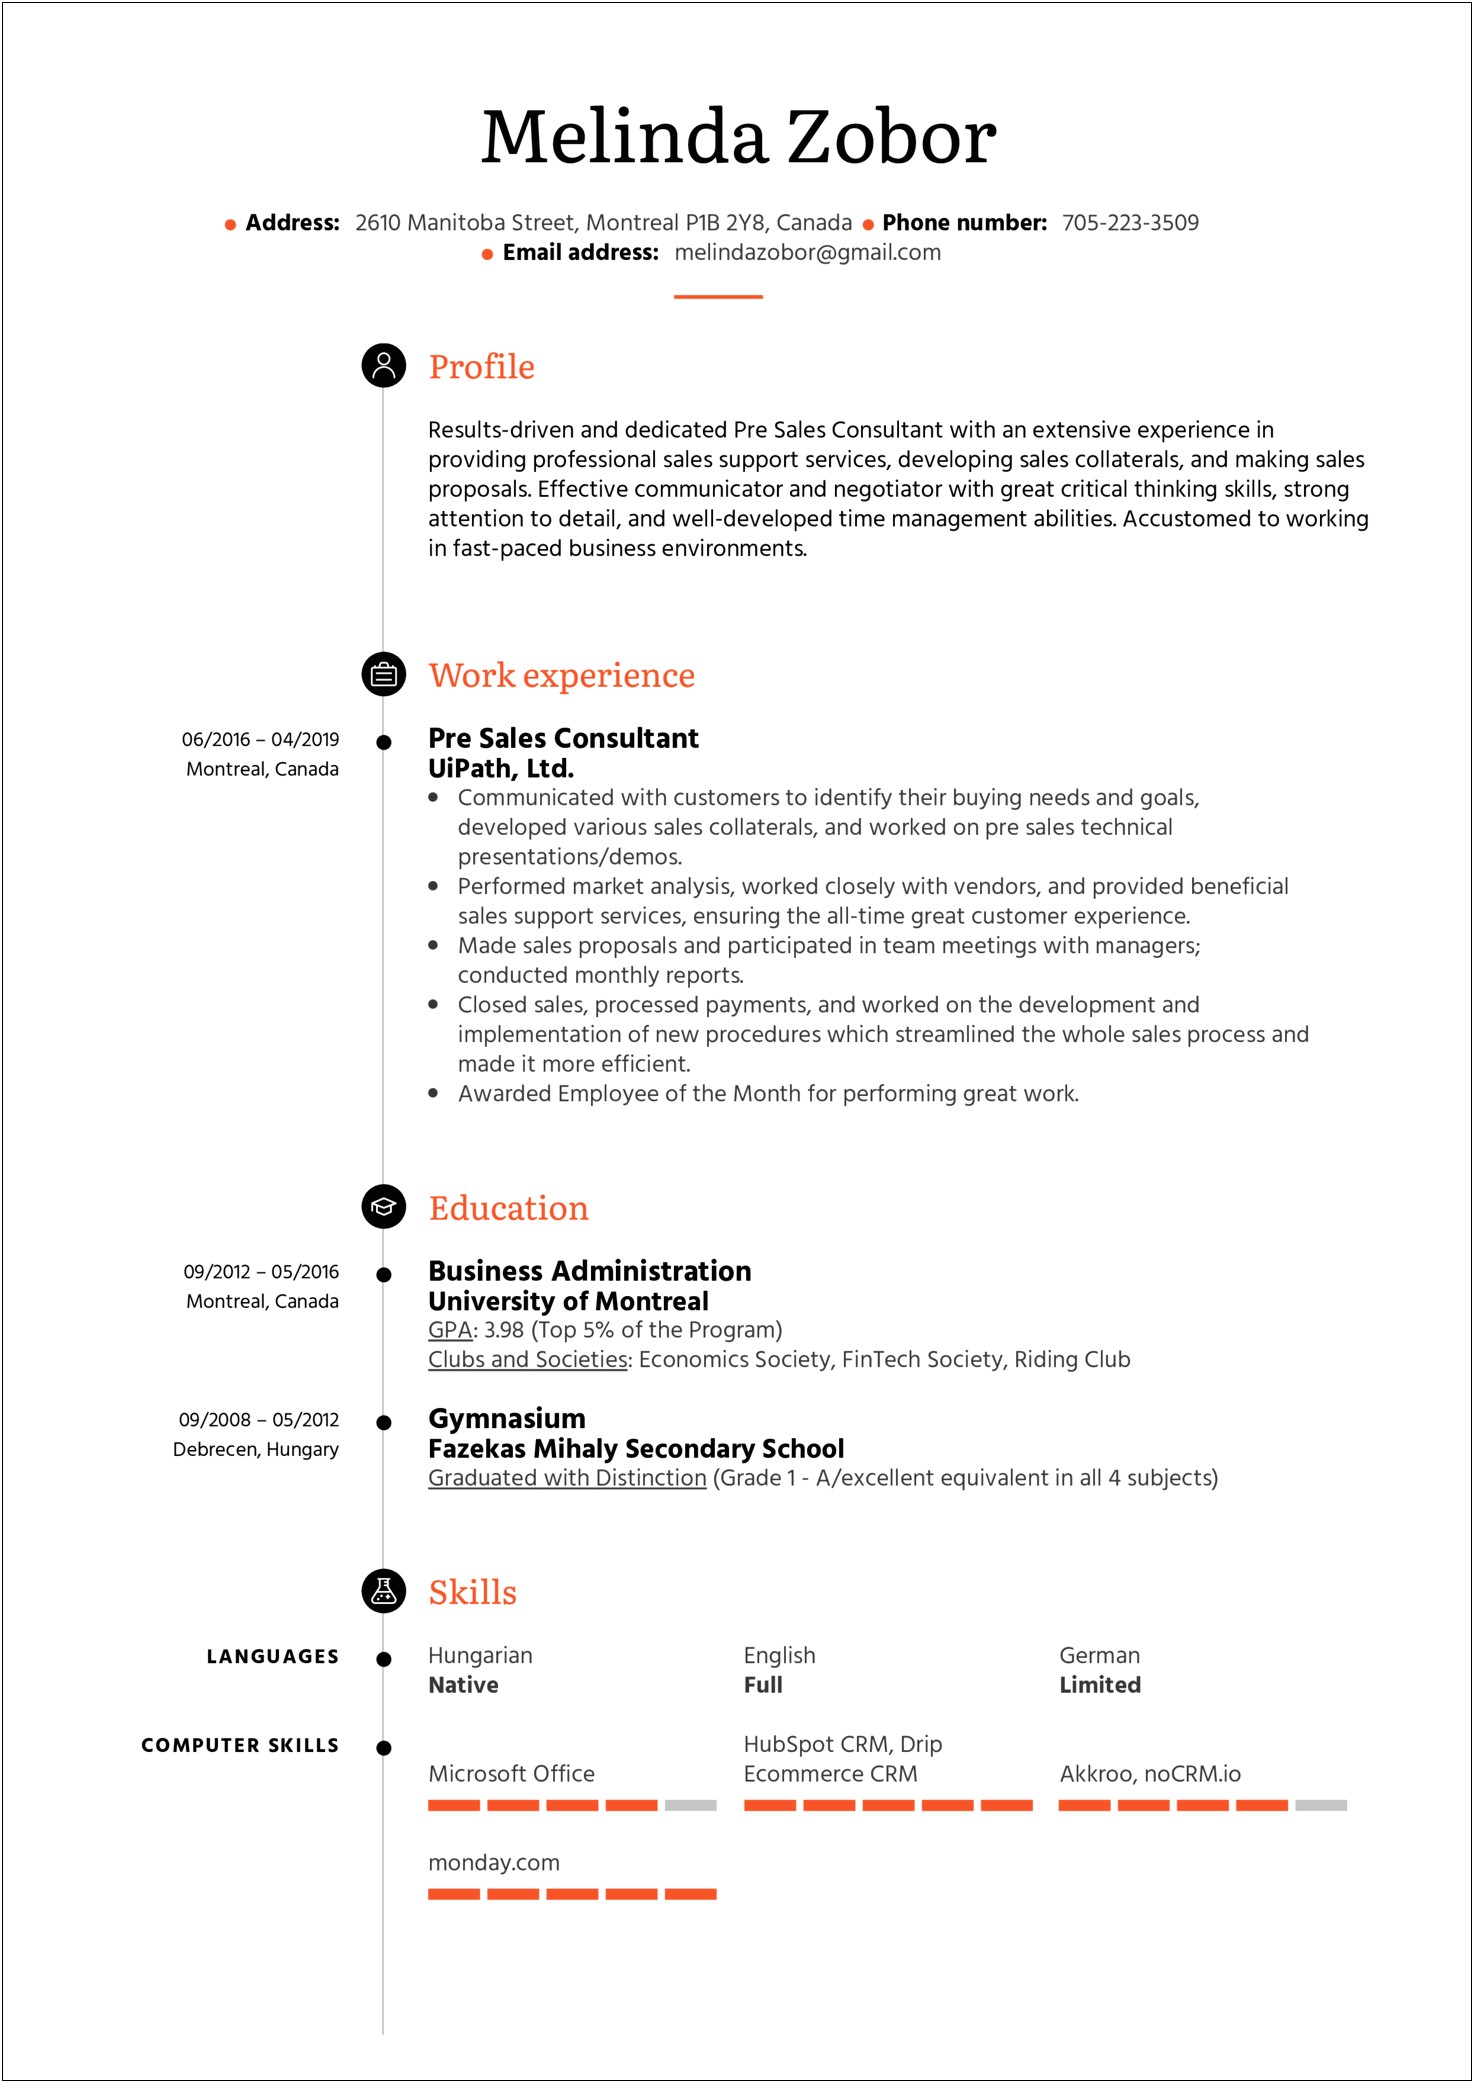 Resume Objective For Retail Sales Consultant